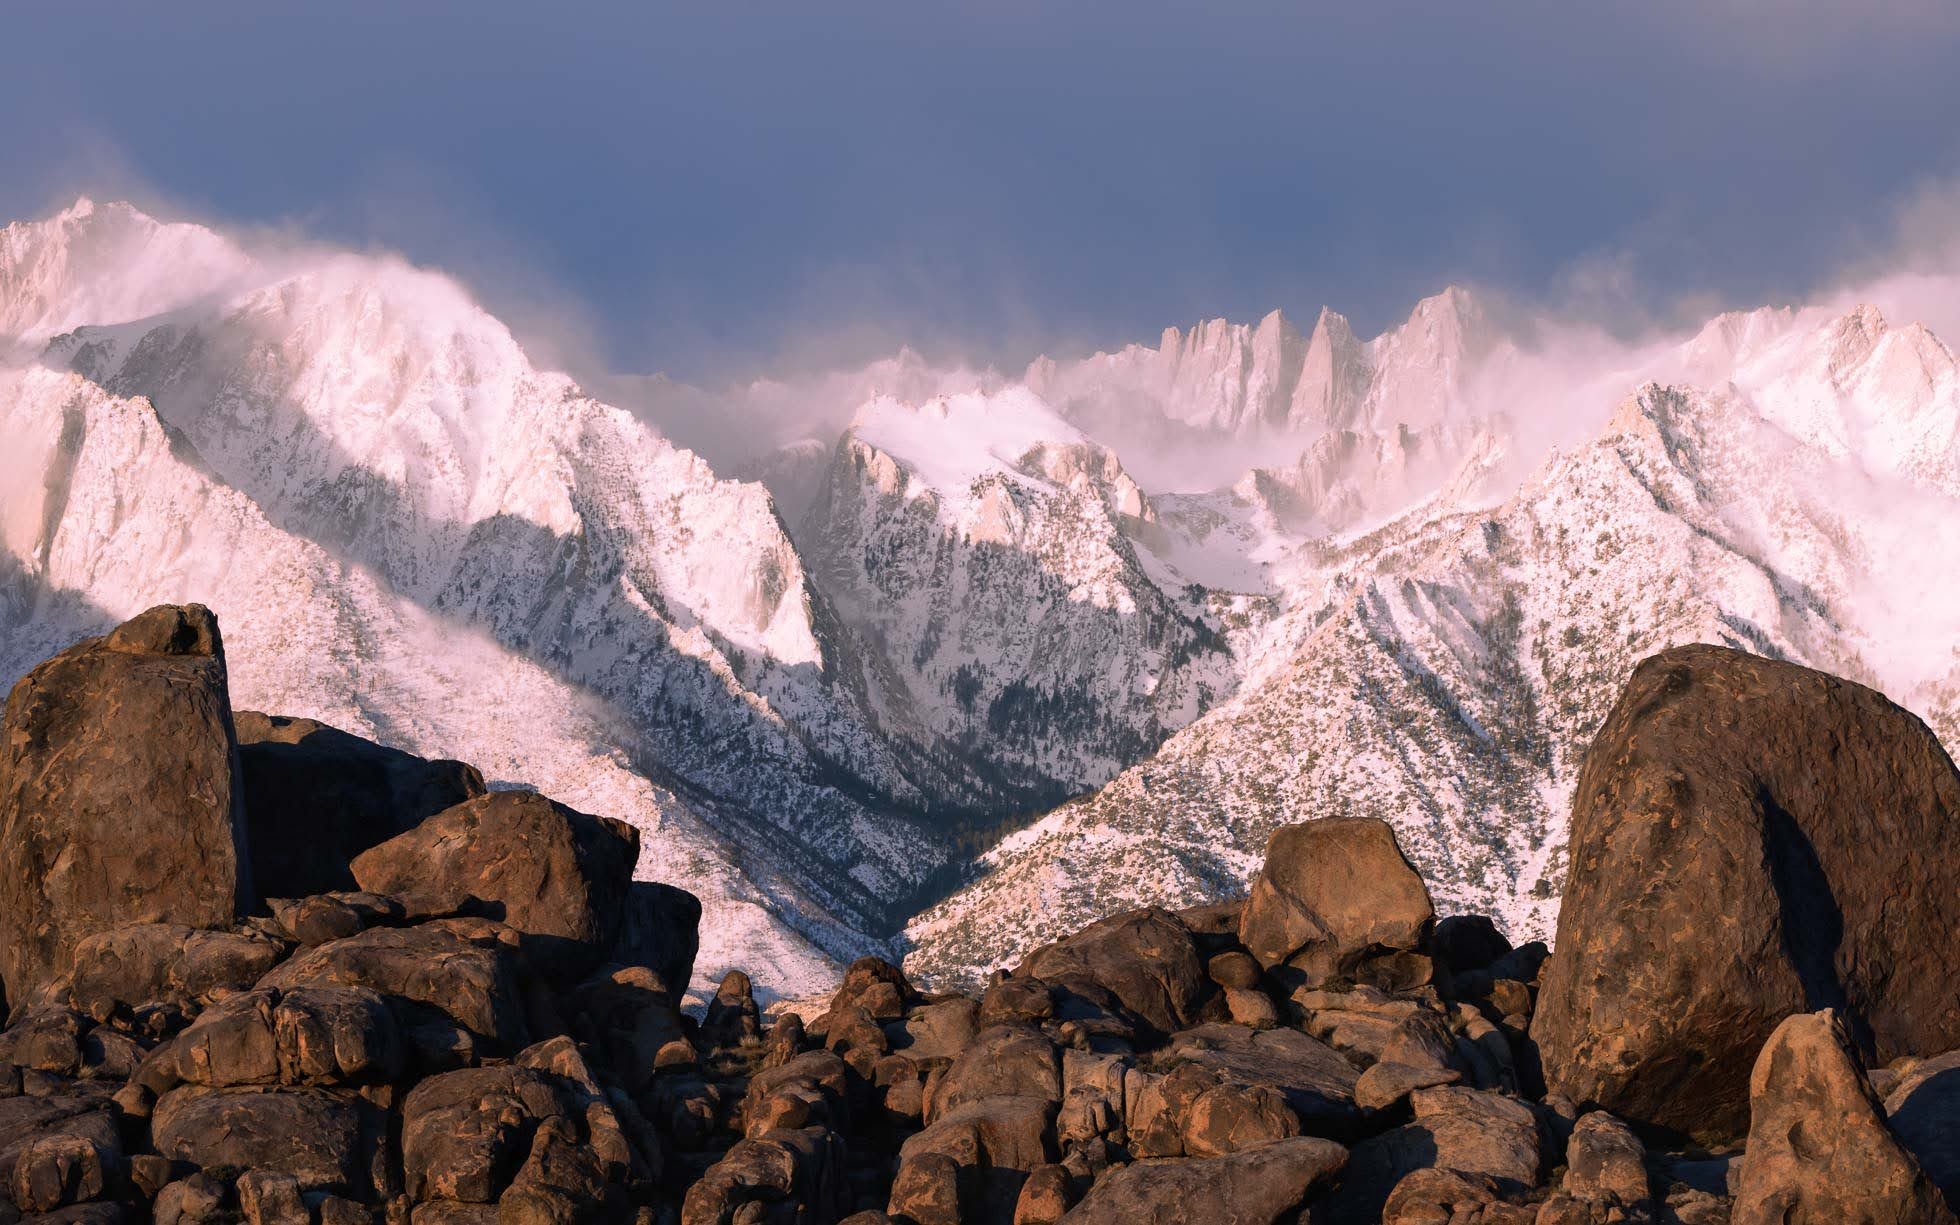 Mount Whitney

As the sun rose, the color dissipated while some of the mist remained softening the rugged peaks of Mount Whitney.

#clickproelite #naturefirst #earth_shotz #bestofthegoldenstate #landscape_captures #mountainshotz #hiyapapayaphotoaday 